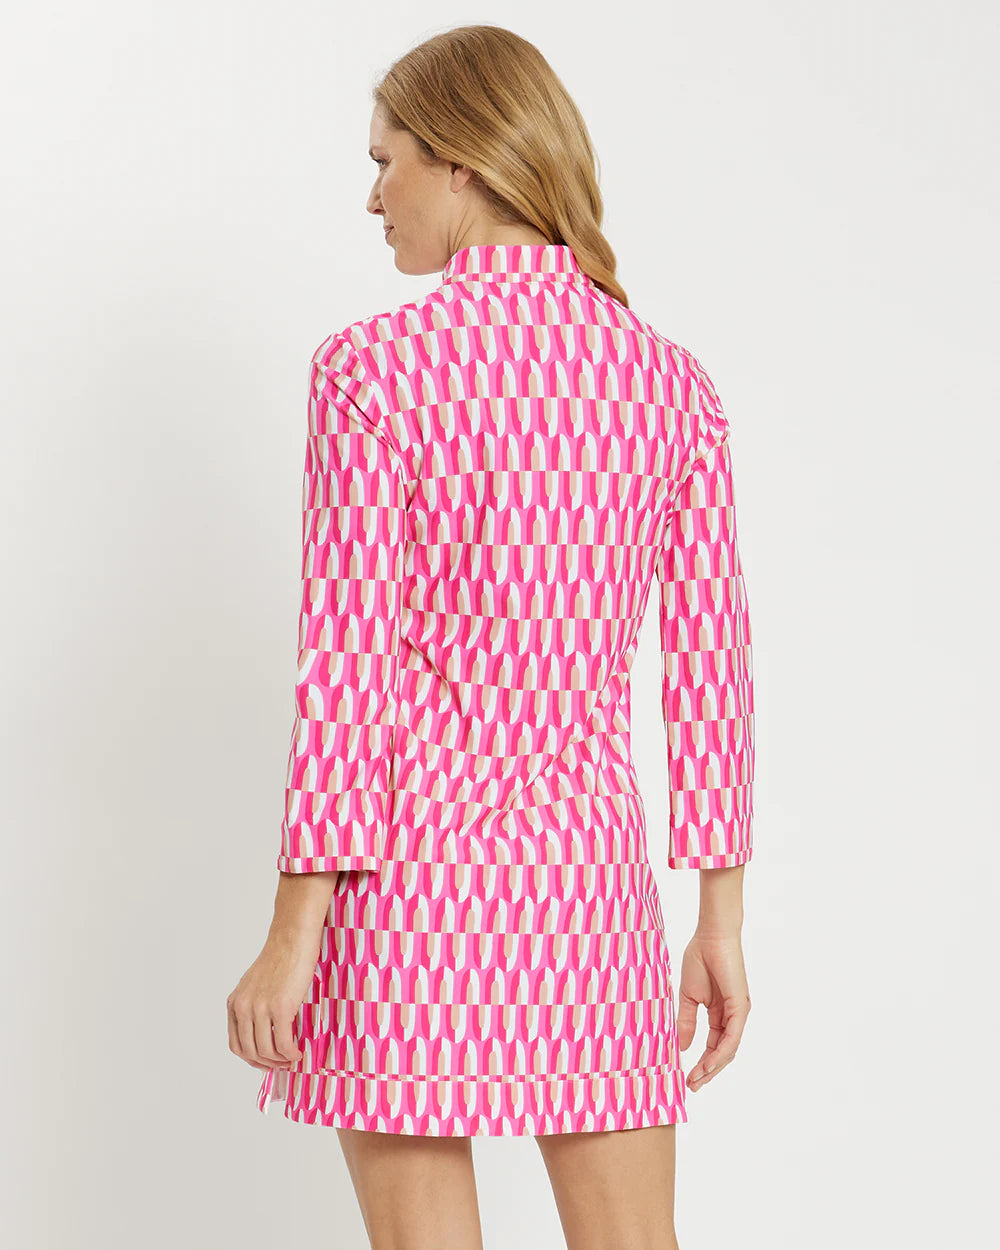 Jude Connally- Kate Dress in Mod Arch Pink